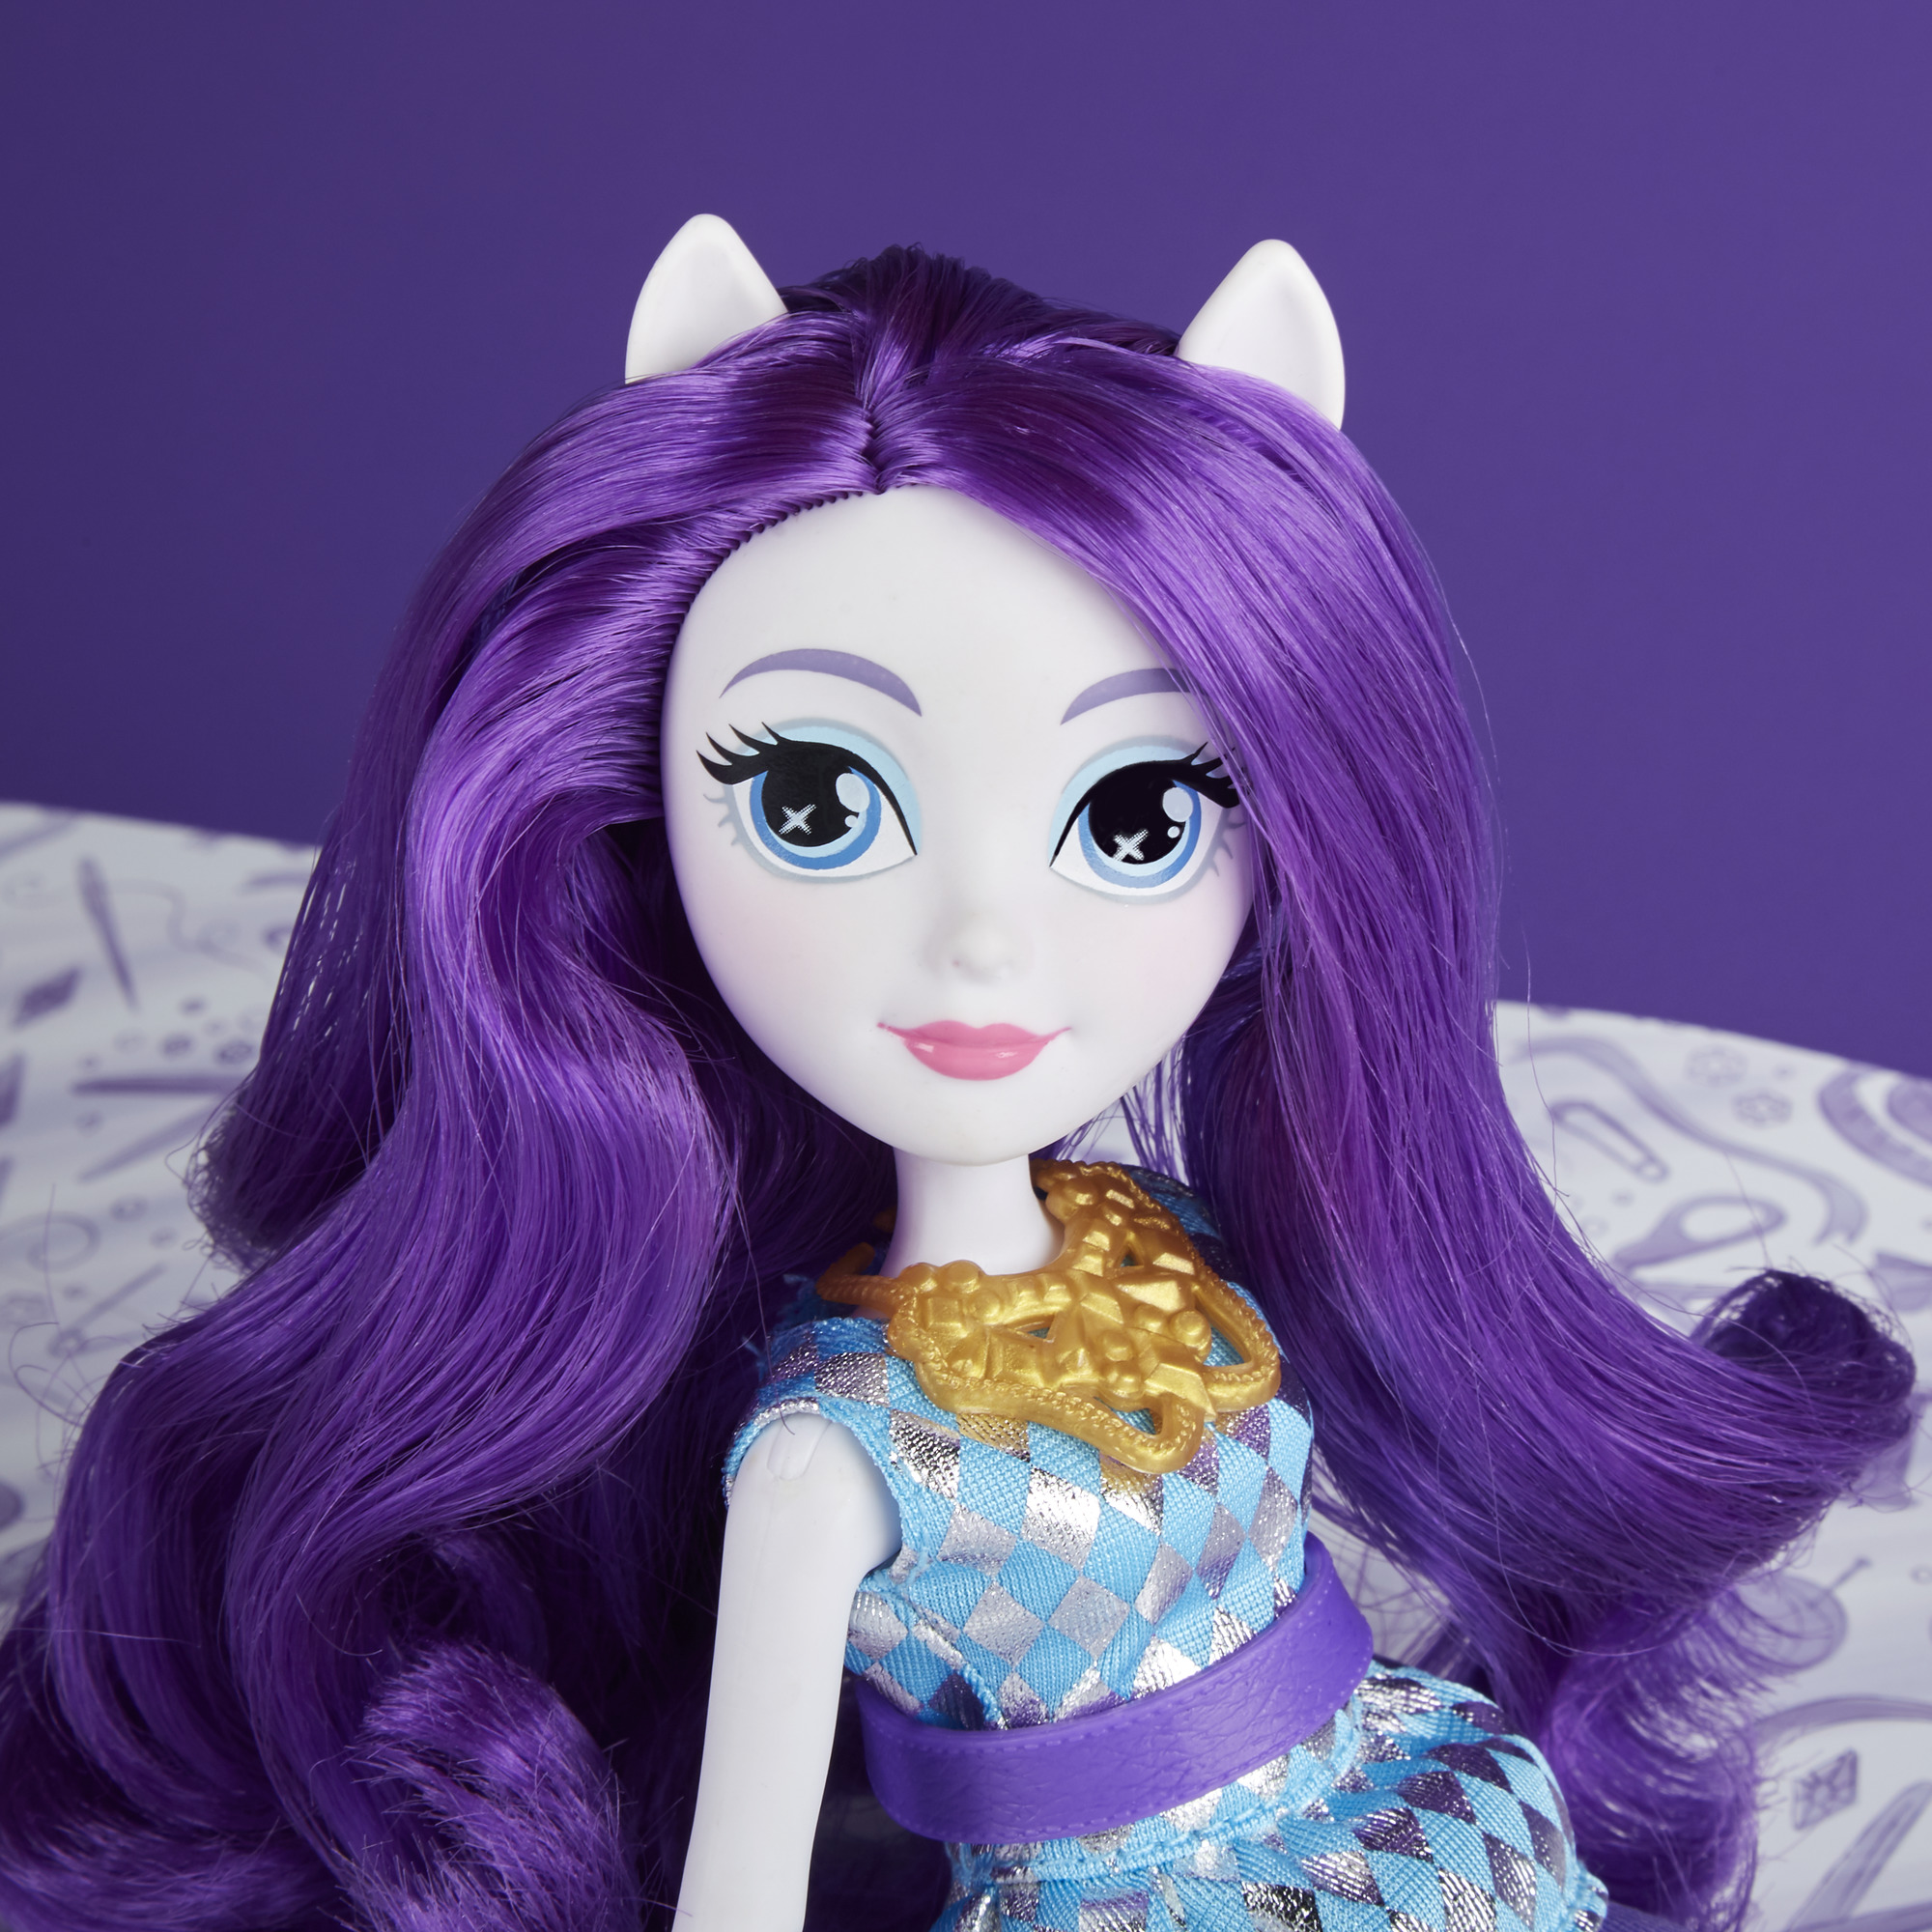 My Little Pony Equestria Girls Rarity Classic Style Doll - image 6 of 9